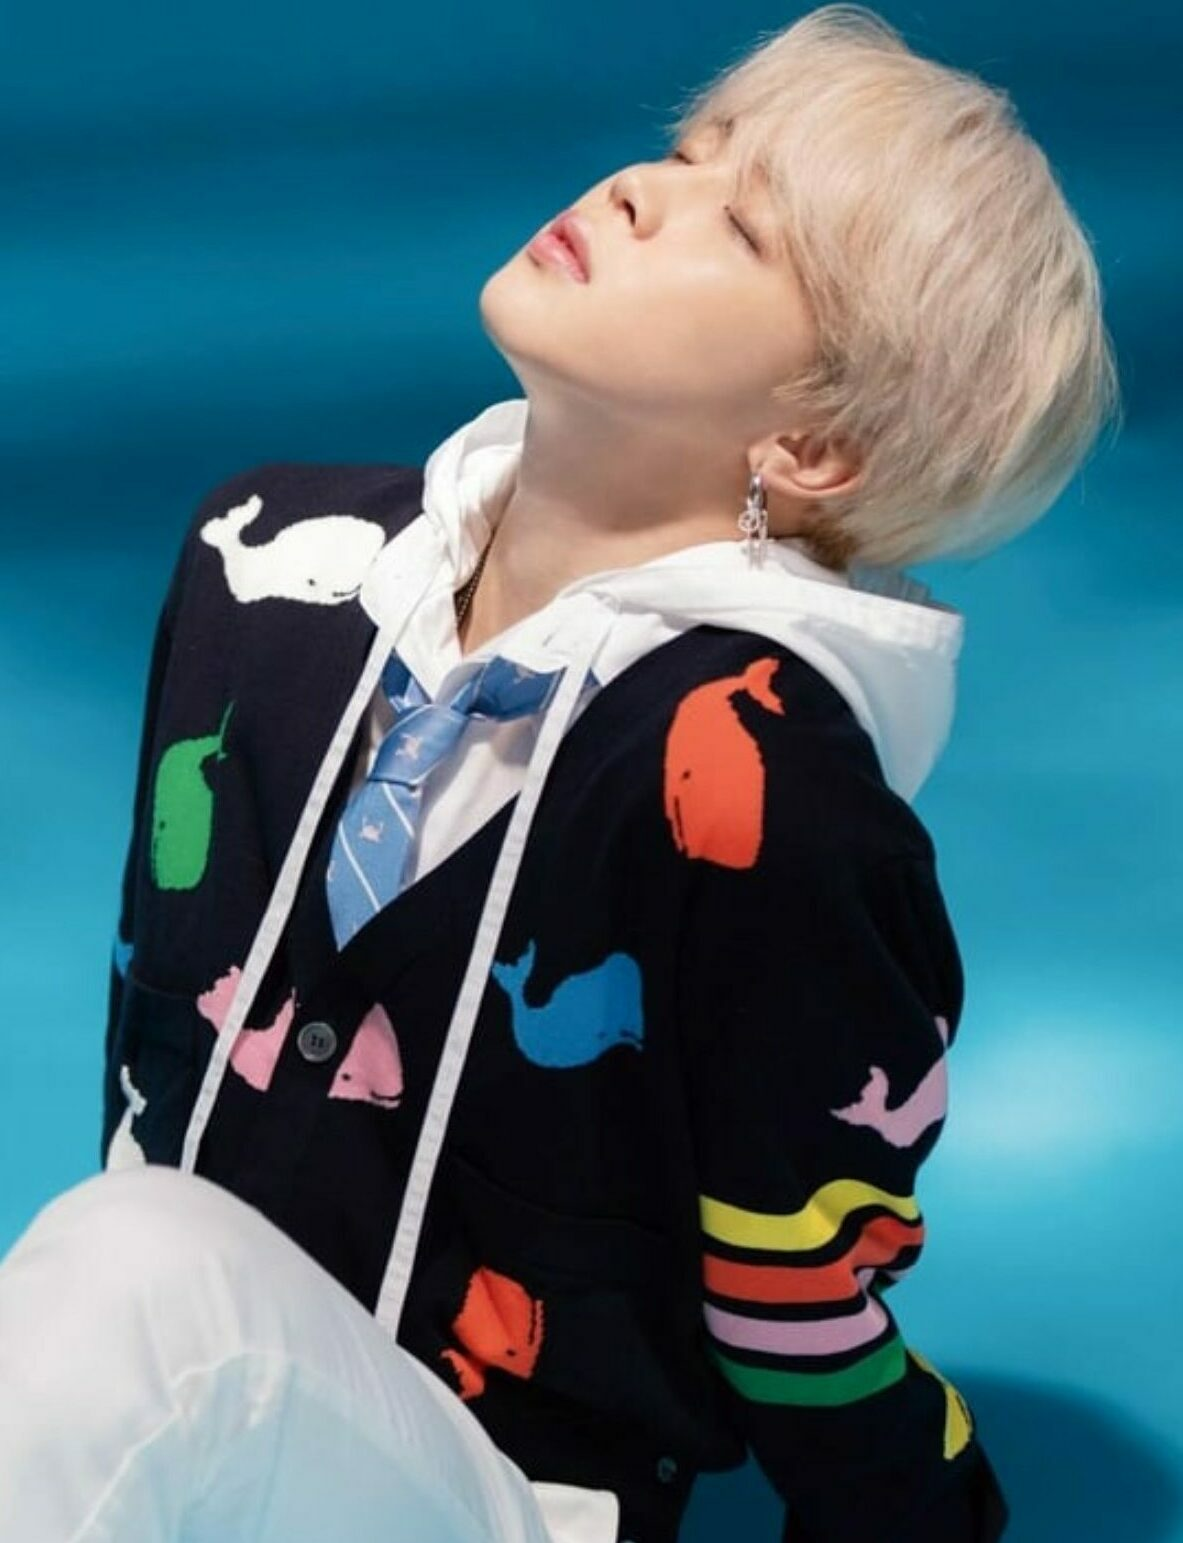 BTS Jimin Inspired Black Cardigan With Colorful Whales